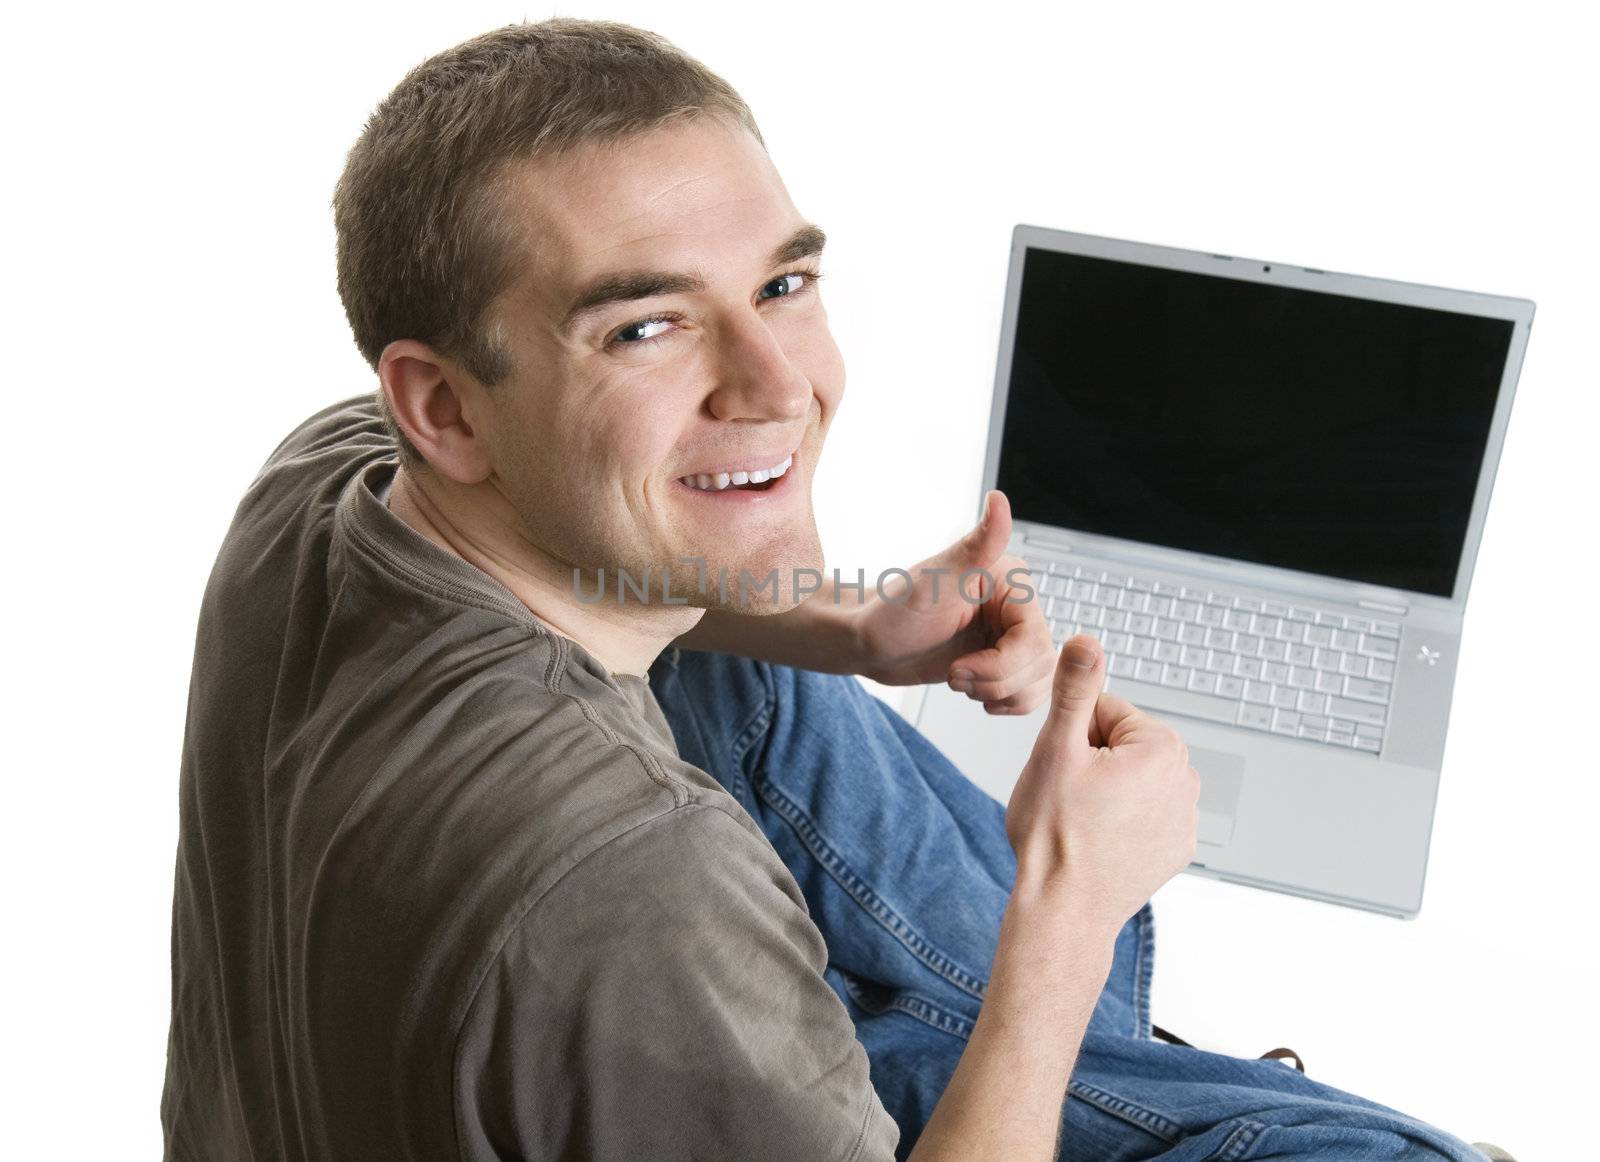 A happy, satisfied laptop user.